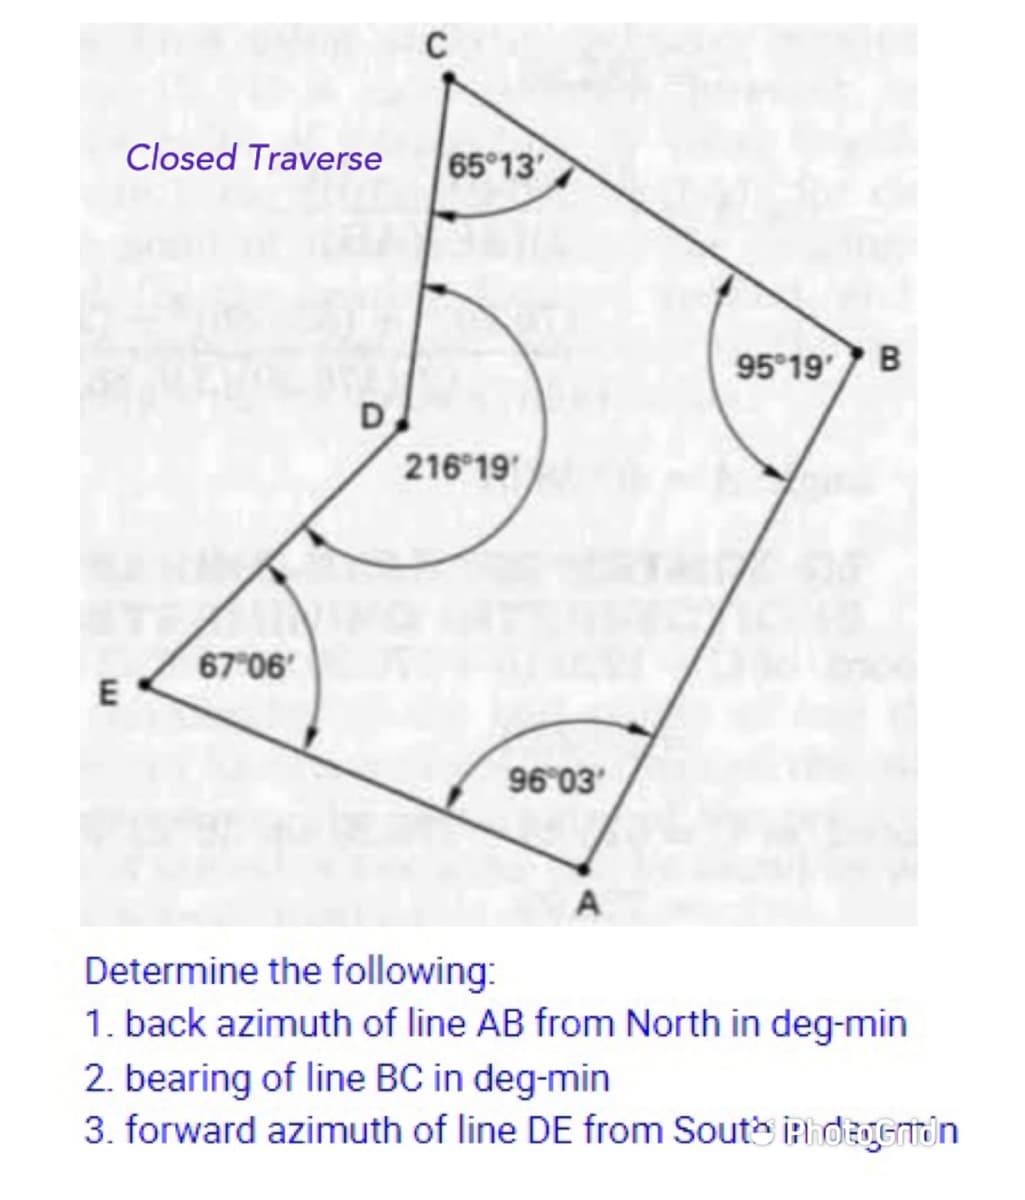 C
Closed Traverse
65 13
95 19' B
D
216 19'
67 06'
96 03'
A
Determine the following:
1. back azimuth of line AB from North in deg-min
2. bearing of line BC in deg-min
3. forward azimuth of line DE from Souts iphdegentdn
